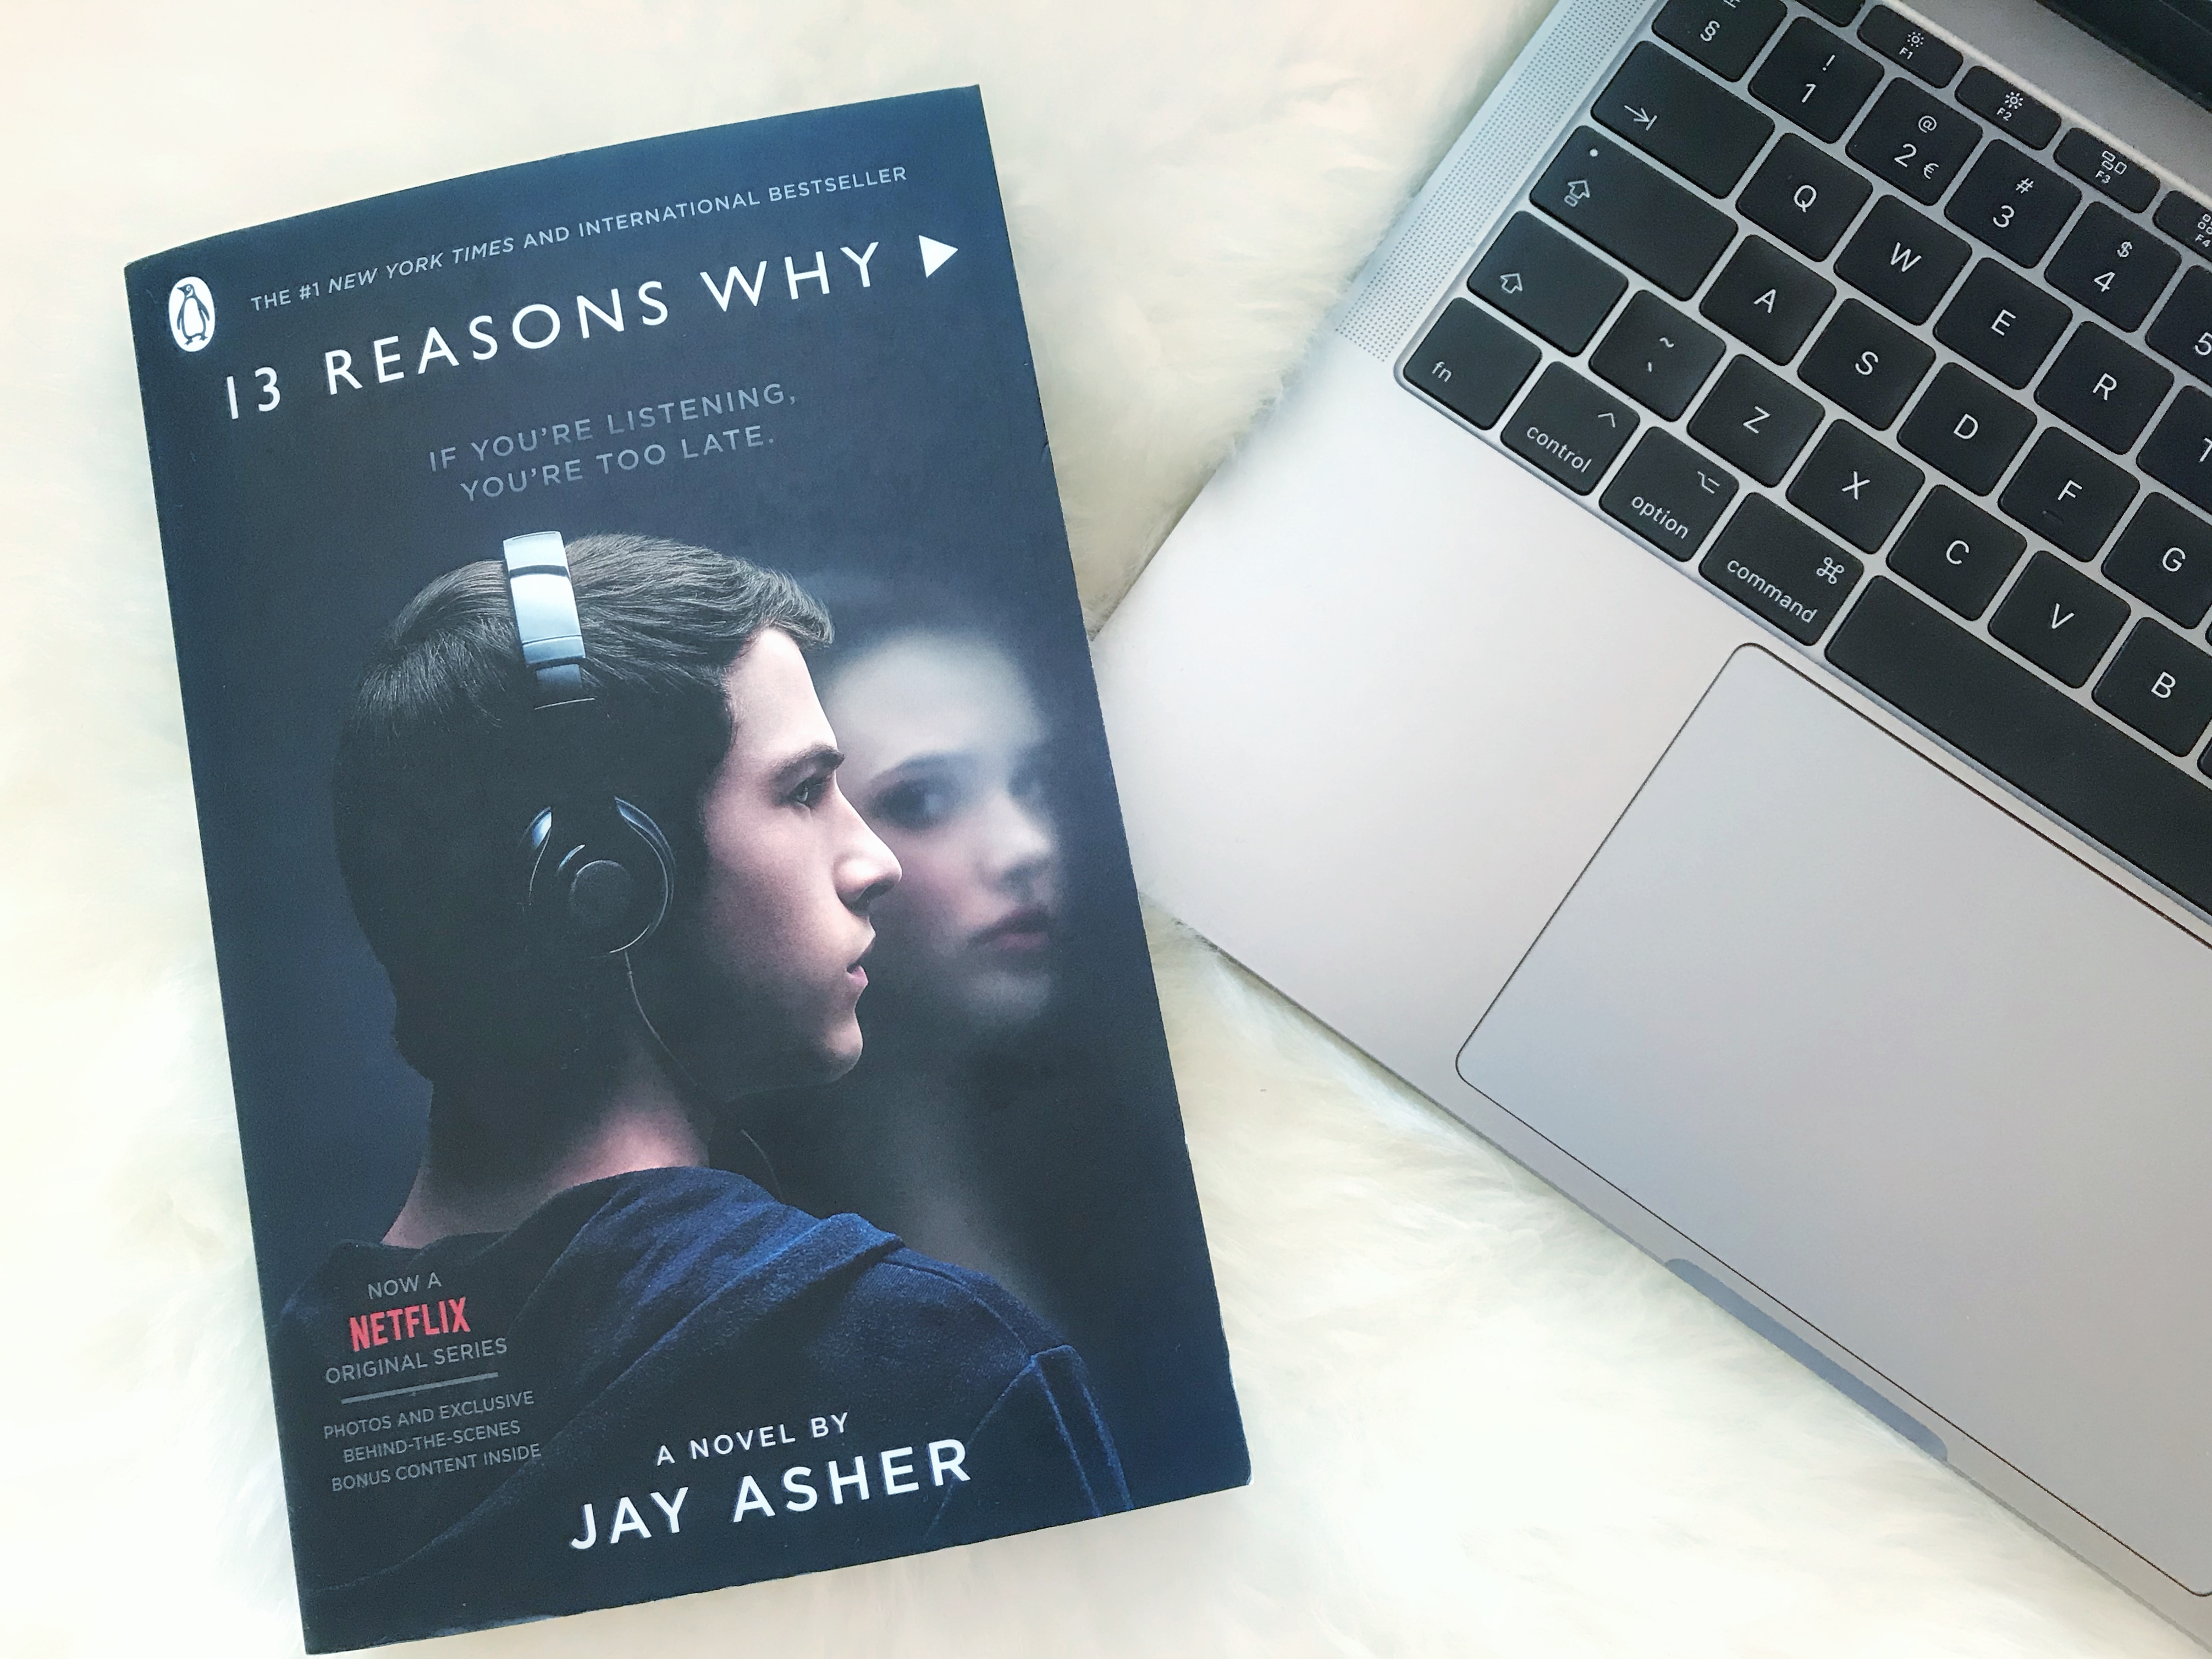 13 reasons why book